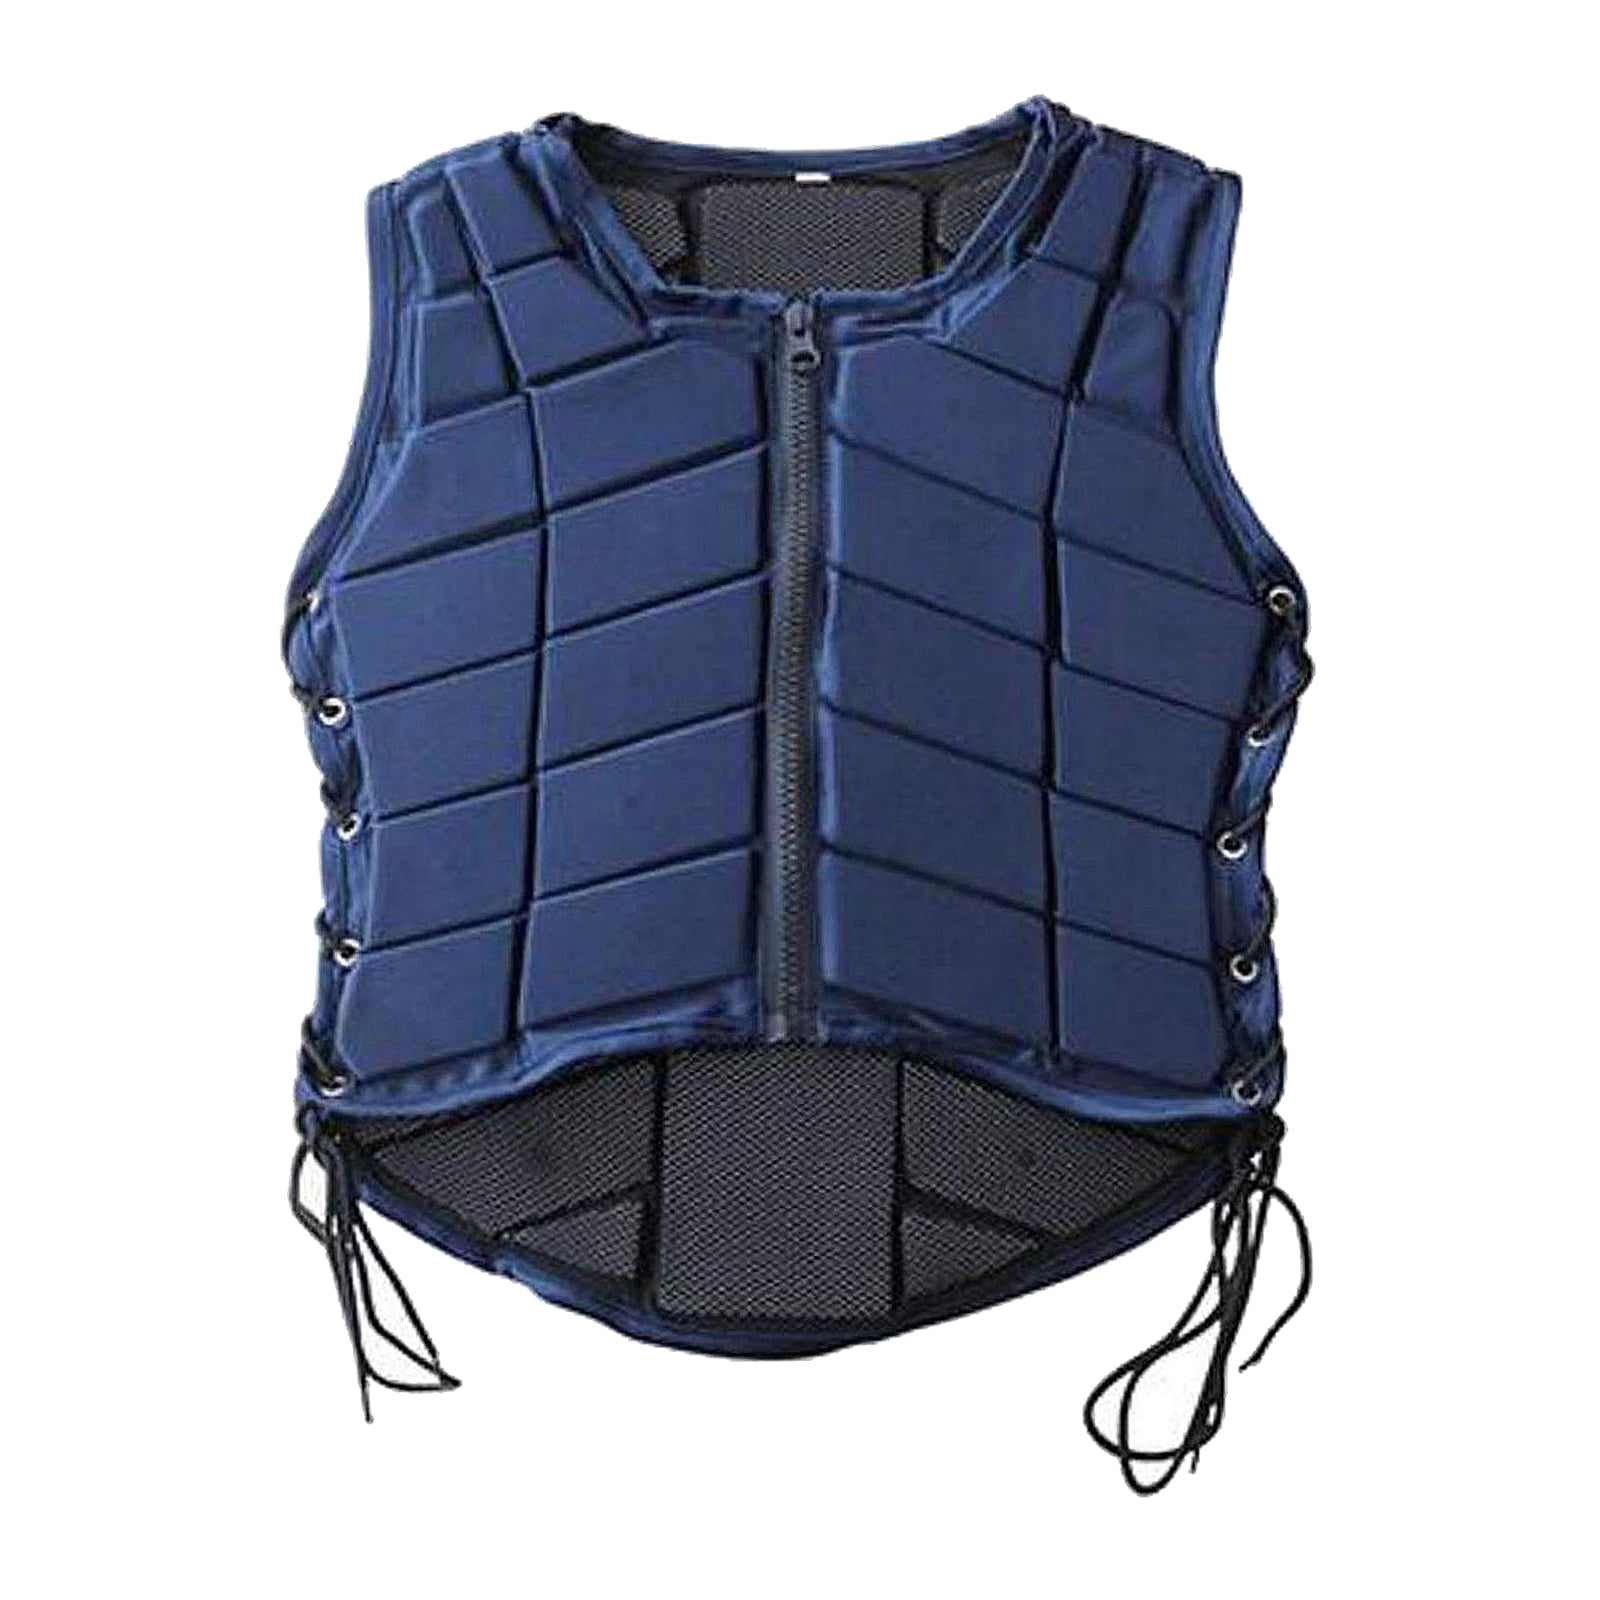 Kids Equestrian Horse Riding Rider Vest Waistcoat Protective Vest Body Protector 